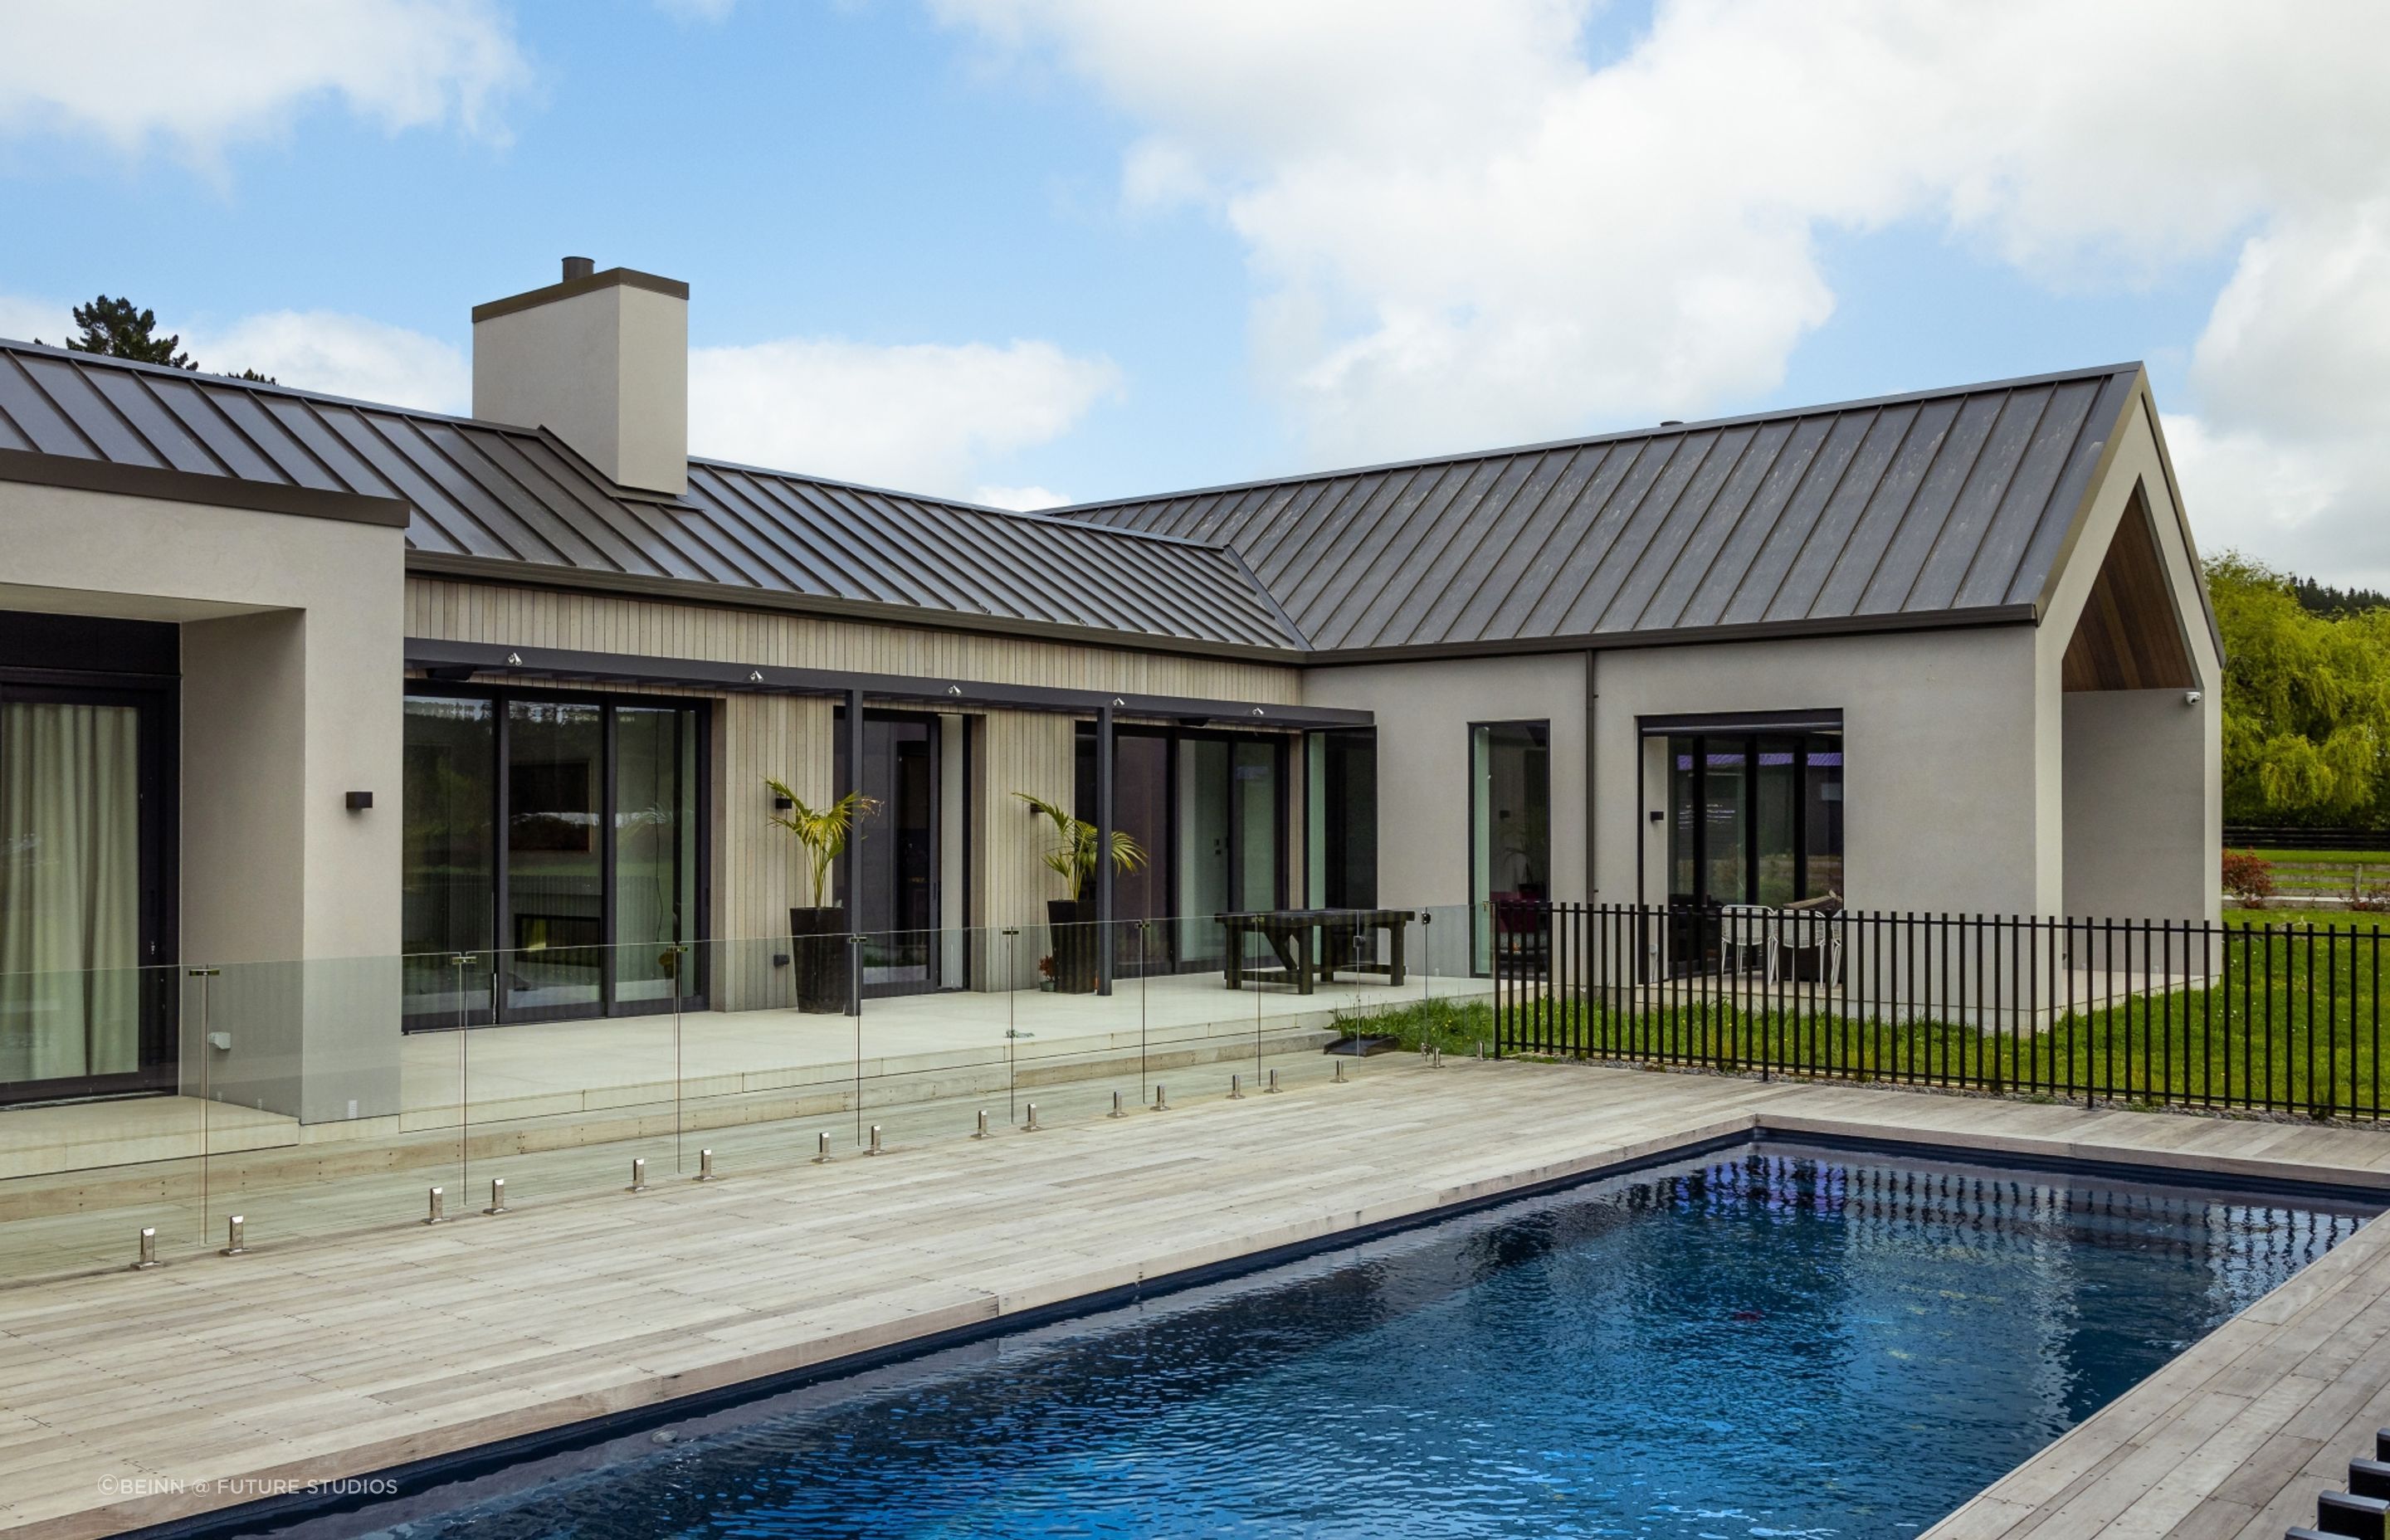 The decking extends out from the back of the home, wrapping around the sides of the pool.